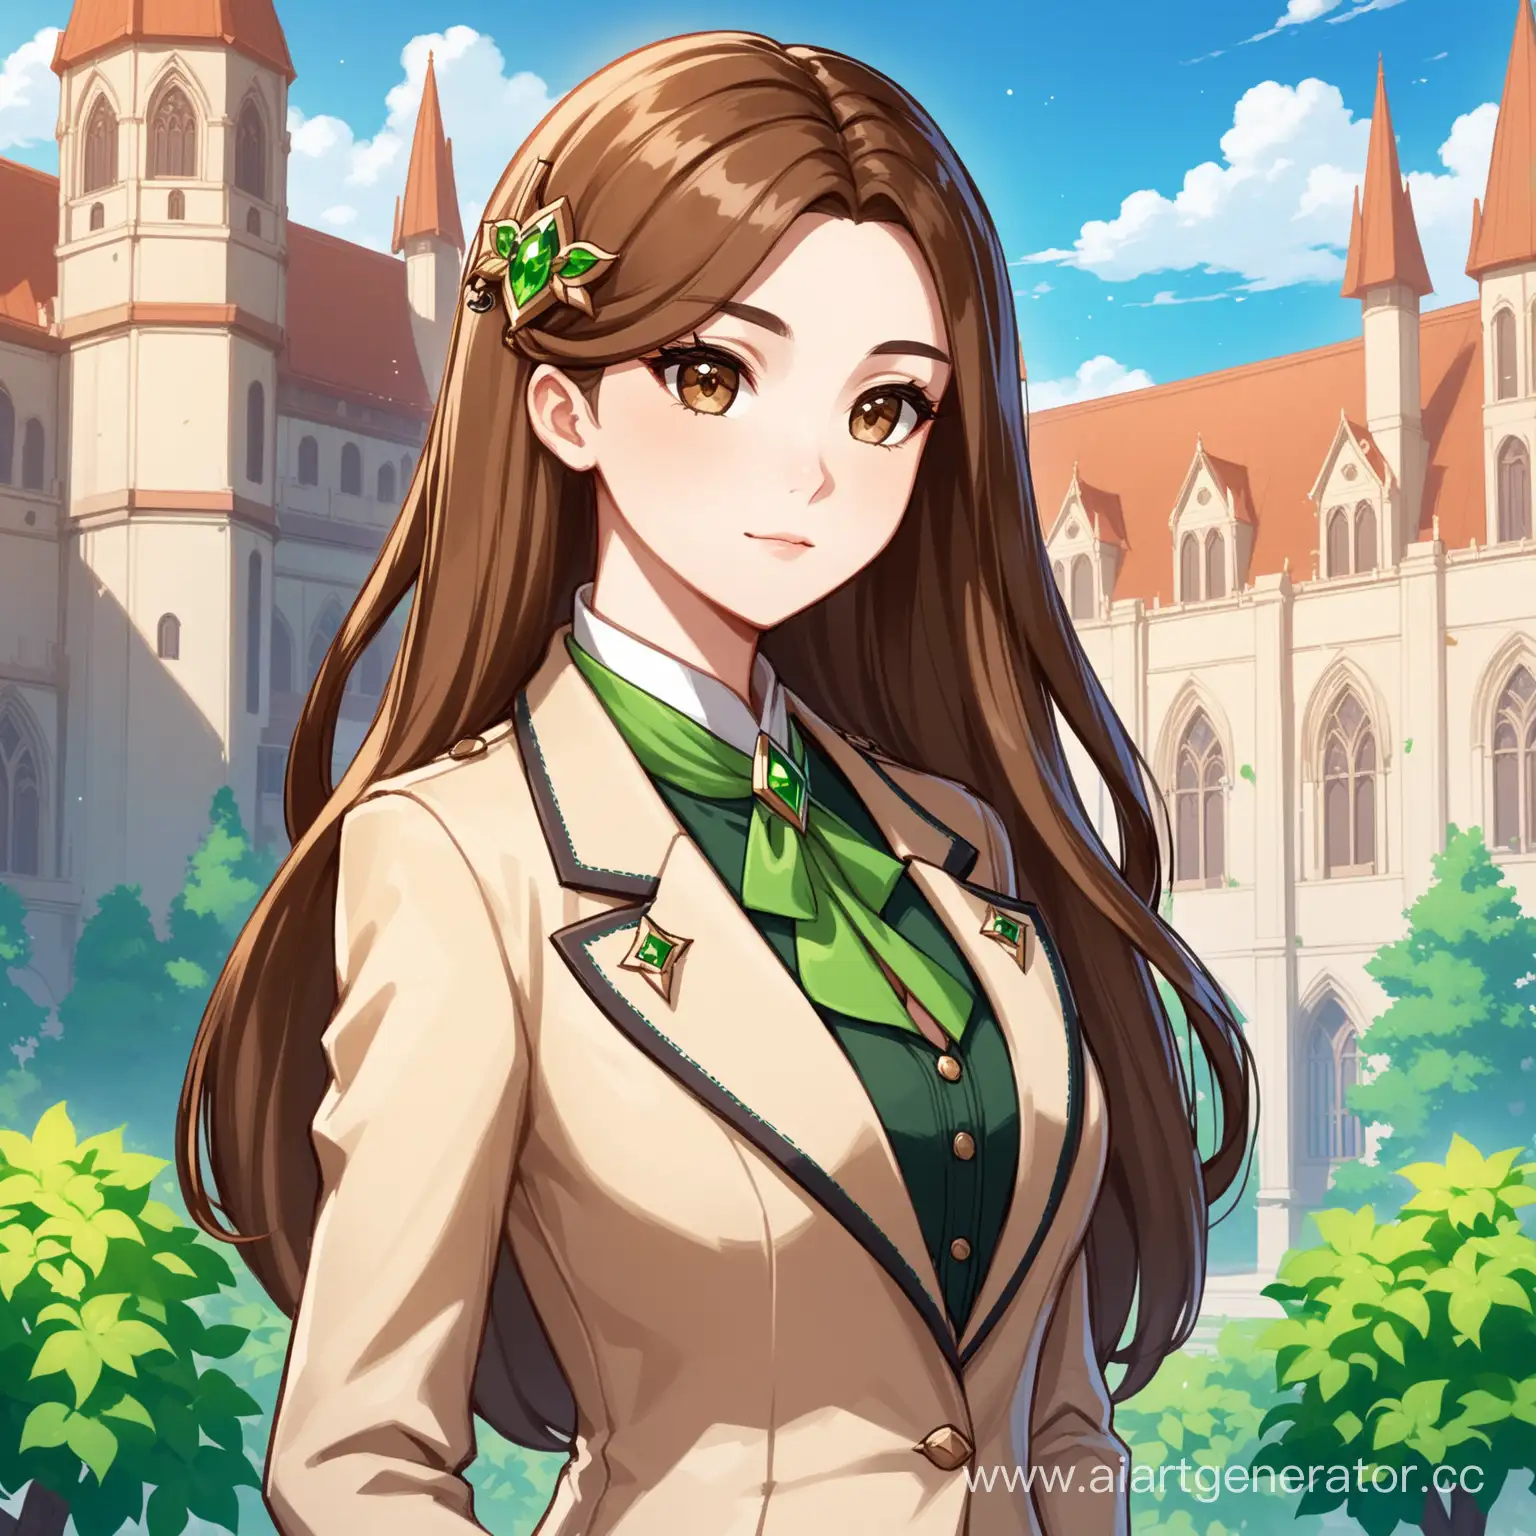 create a character in genshin impact style. A tall young woman, a magician who owns dendro green power. She is a psychologist, wears a beige suit, but make it with more details. she has a long brown hair with different beautiful barrette and clips. She has light-brown eyes
The background is dark academia in an old univercity campus 